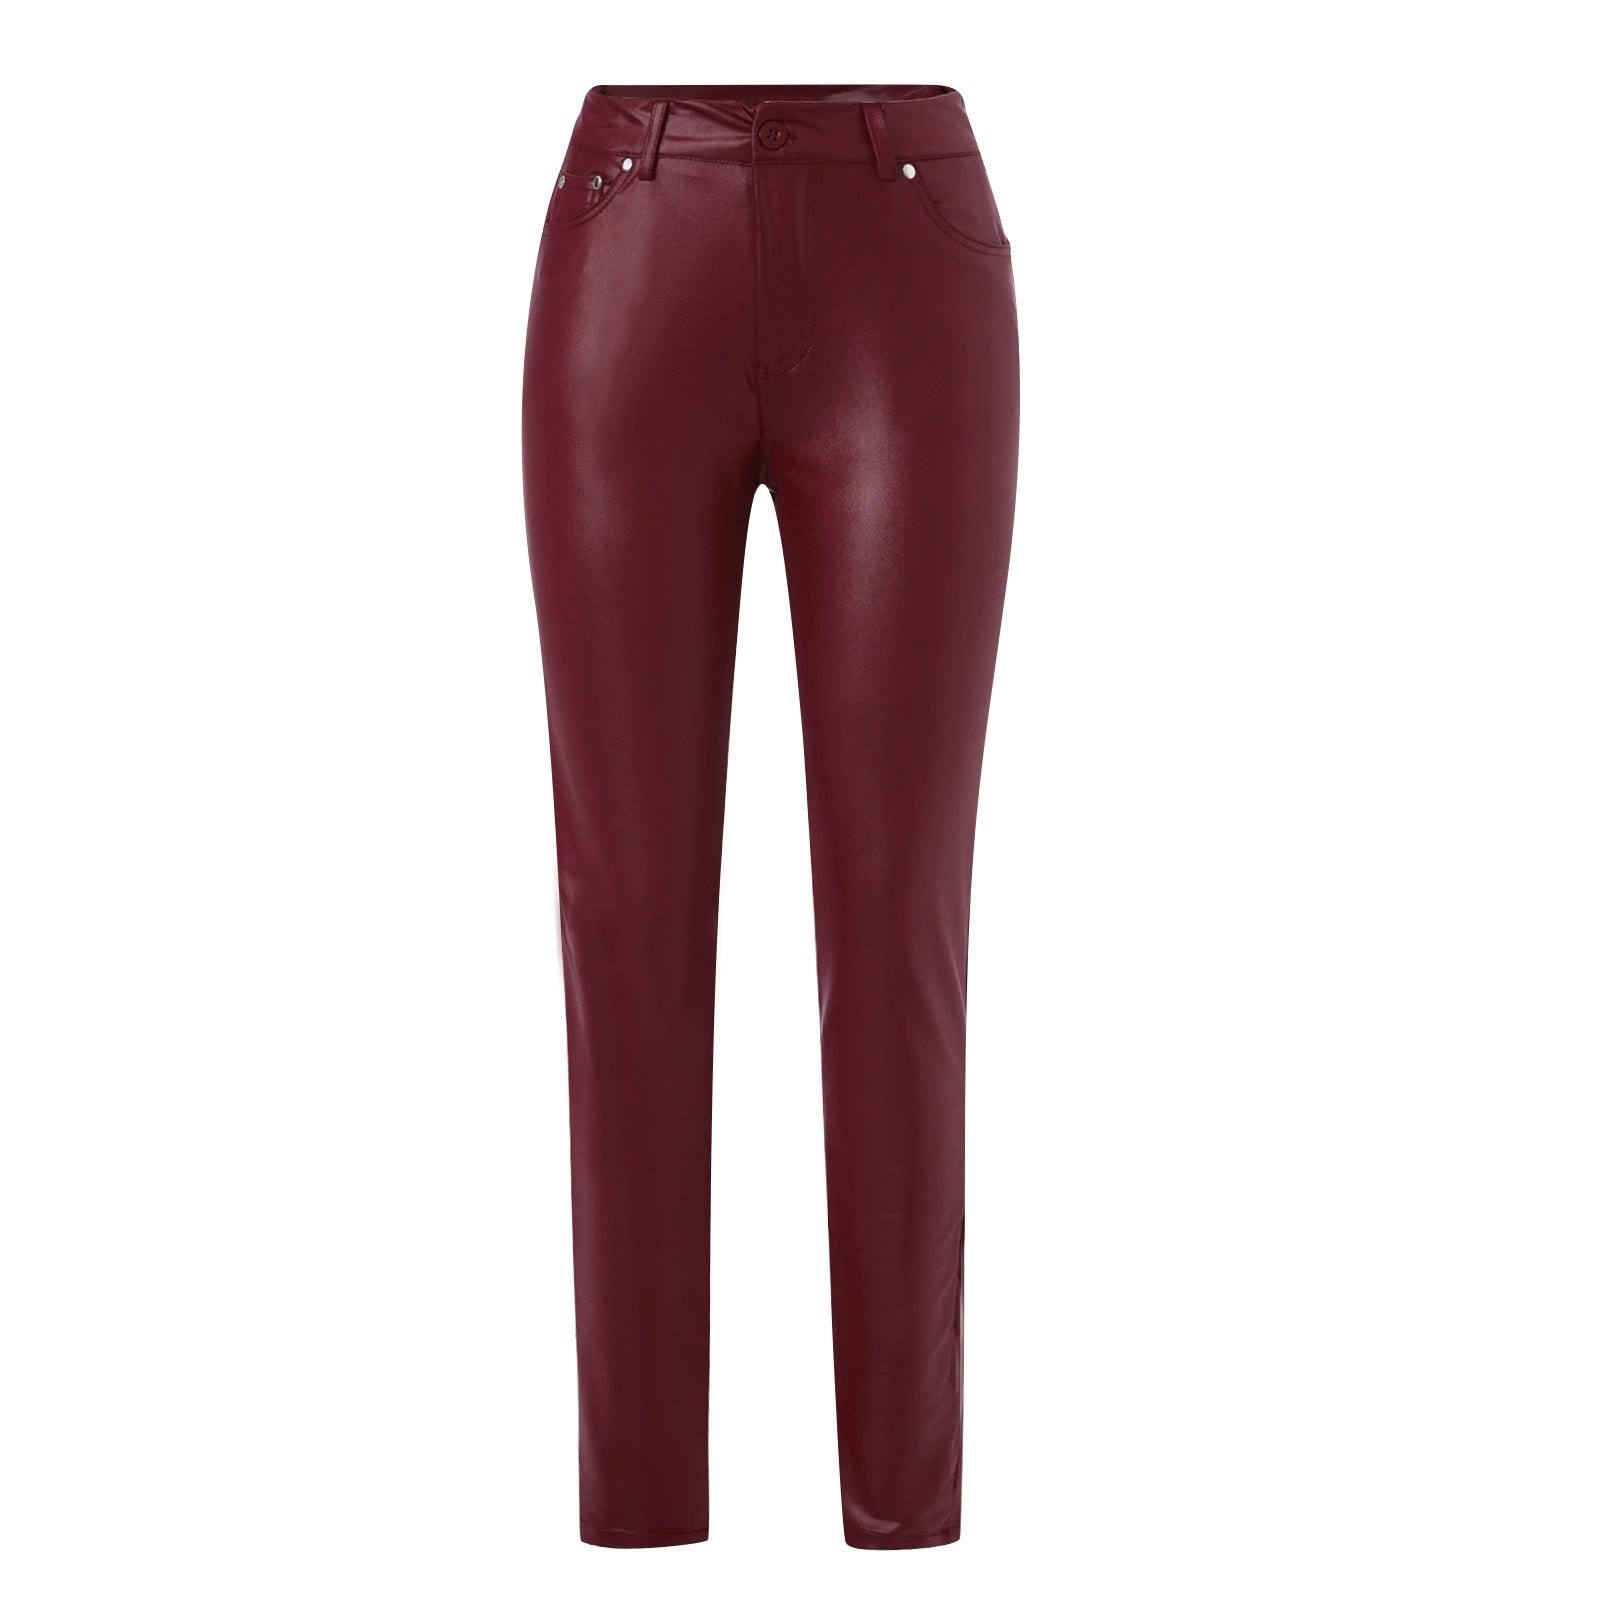 Cinessd  Female Leather Leggings Pants Girl Solid Small Feet Fashion Pants Stretch Trousers Slim Fit Autumn High Waist Casual Pants